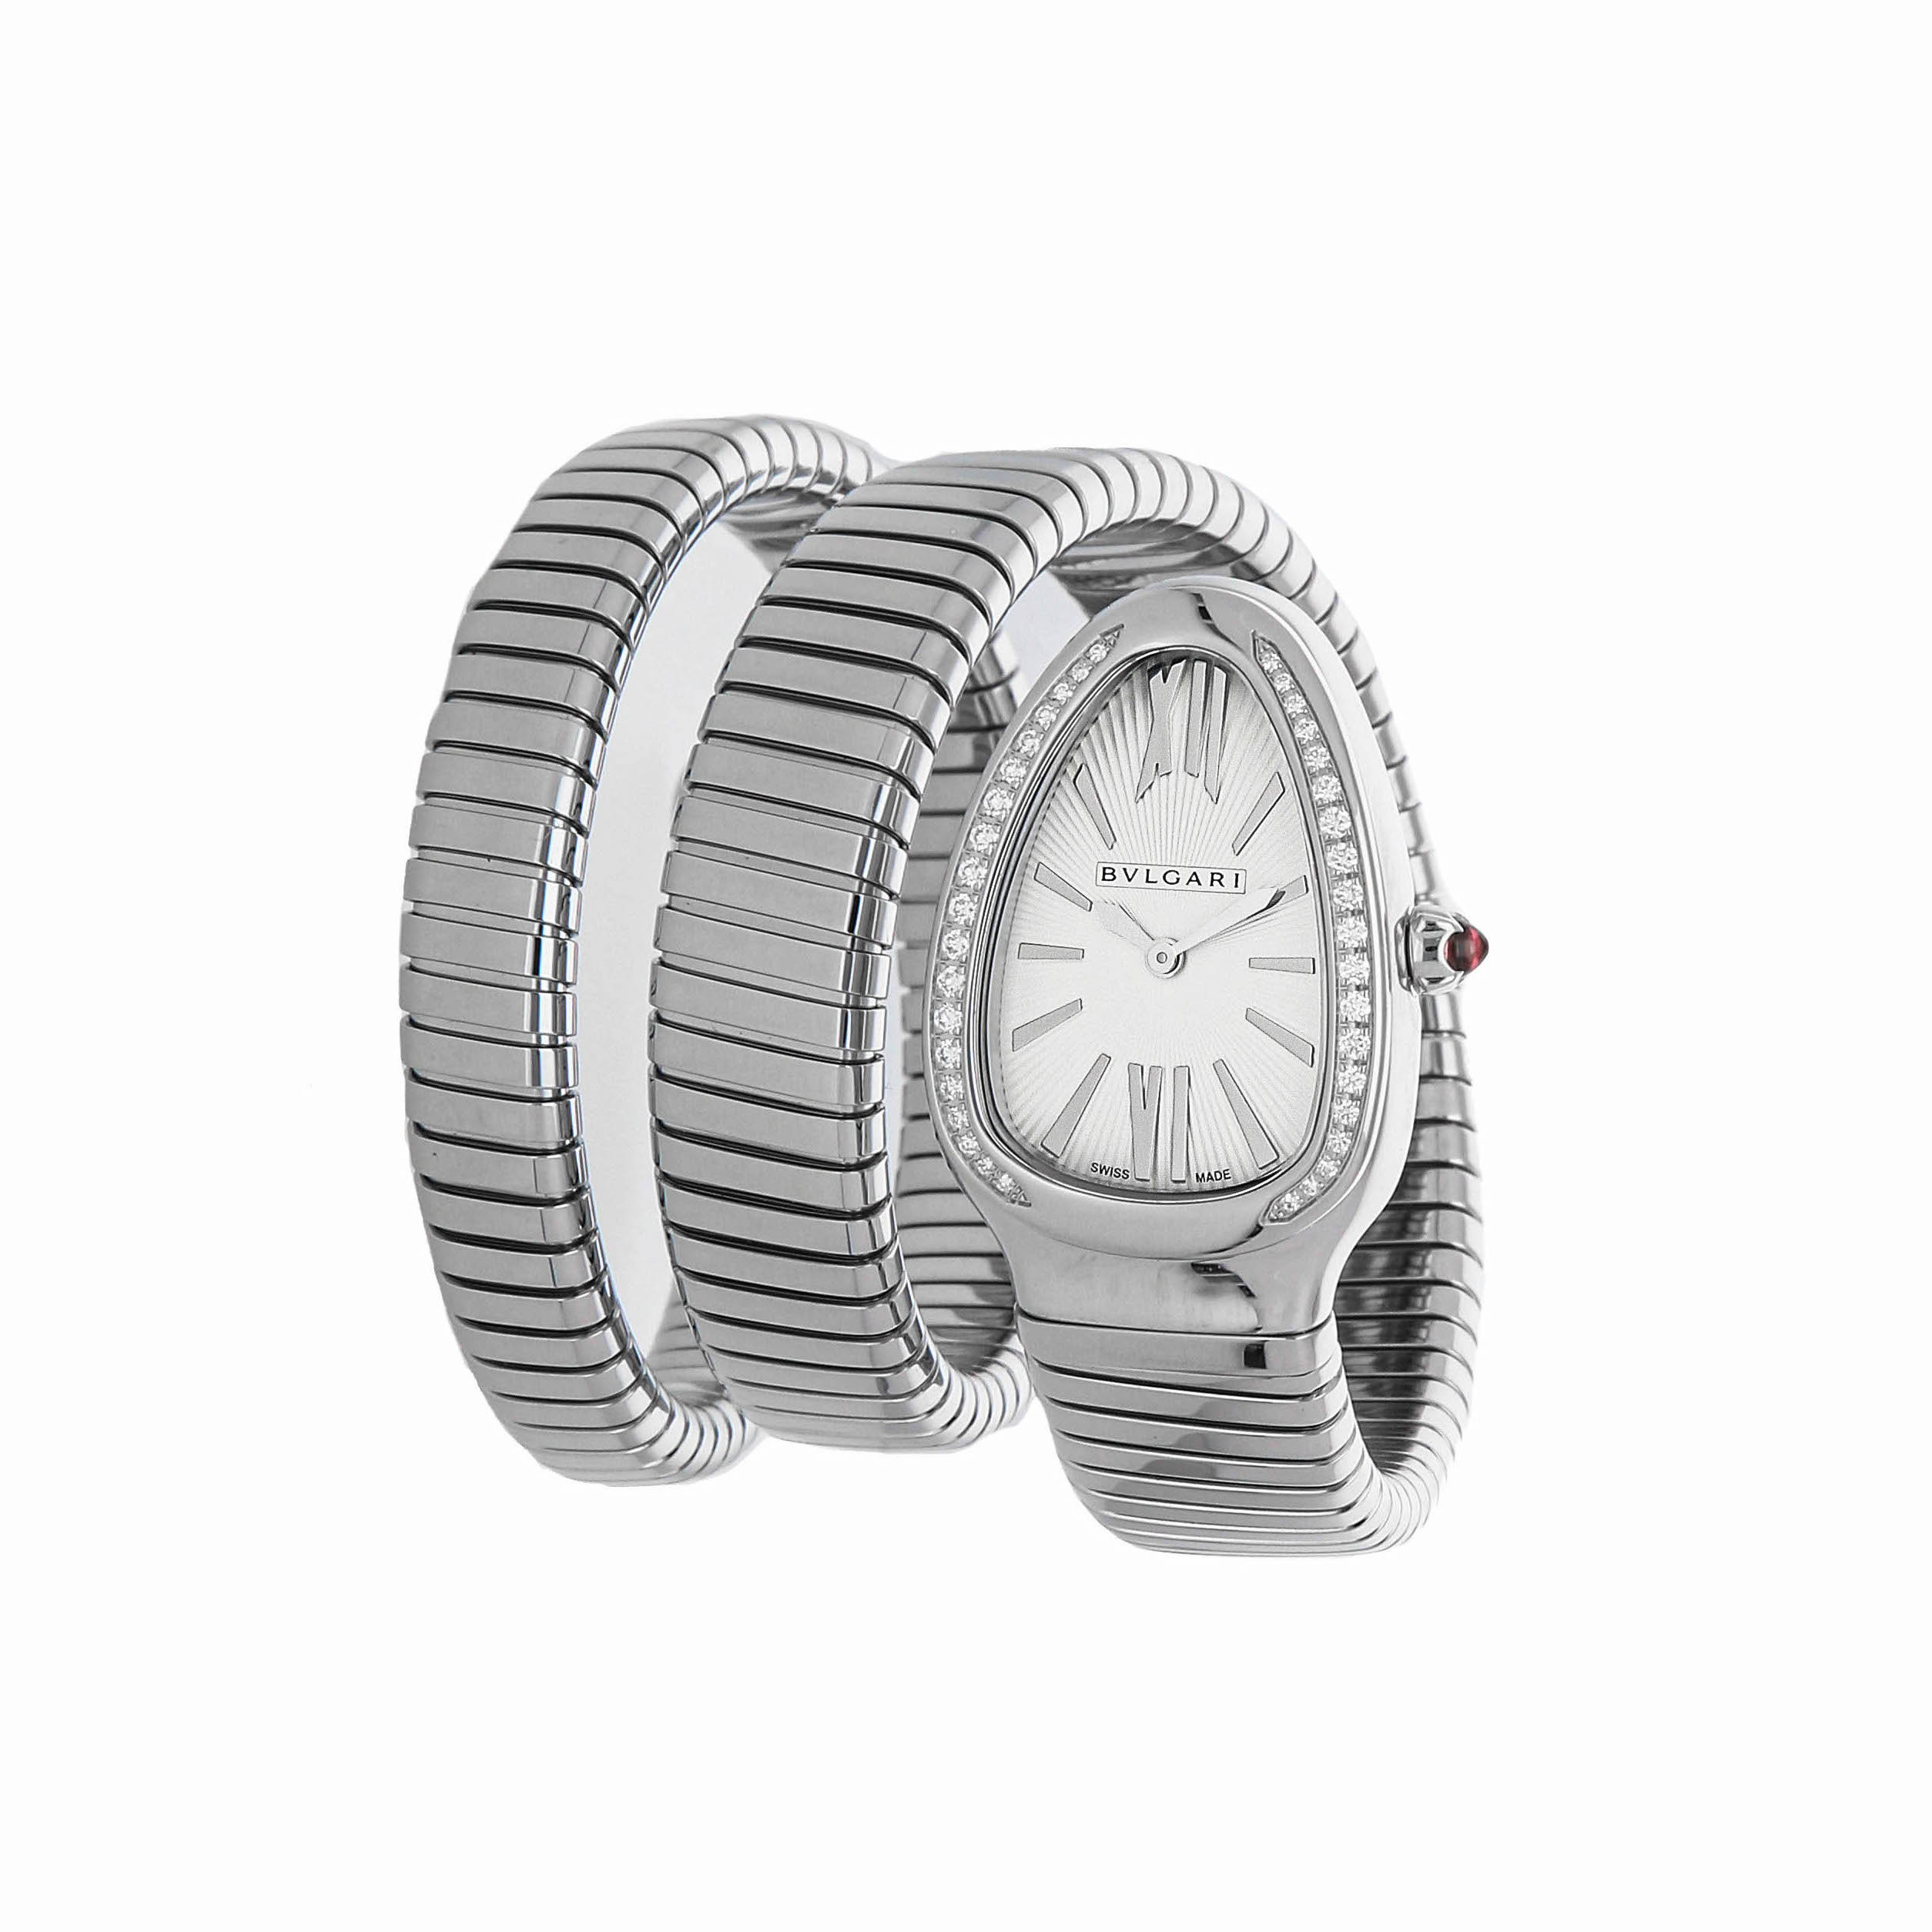 bulgari watches pre owned